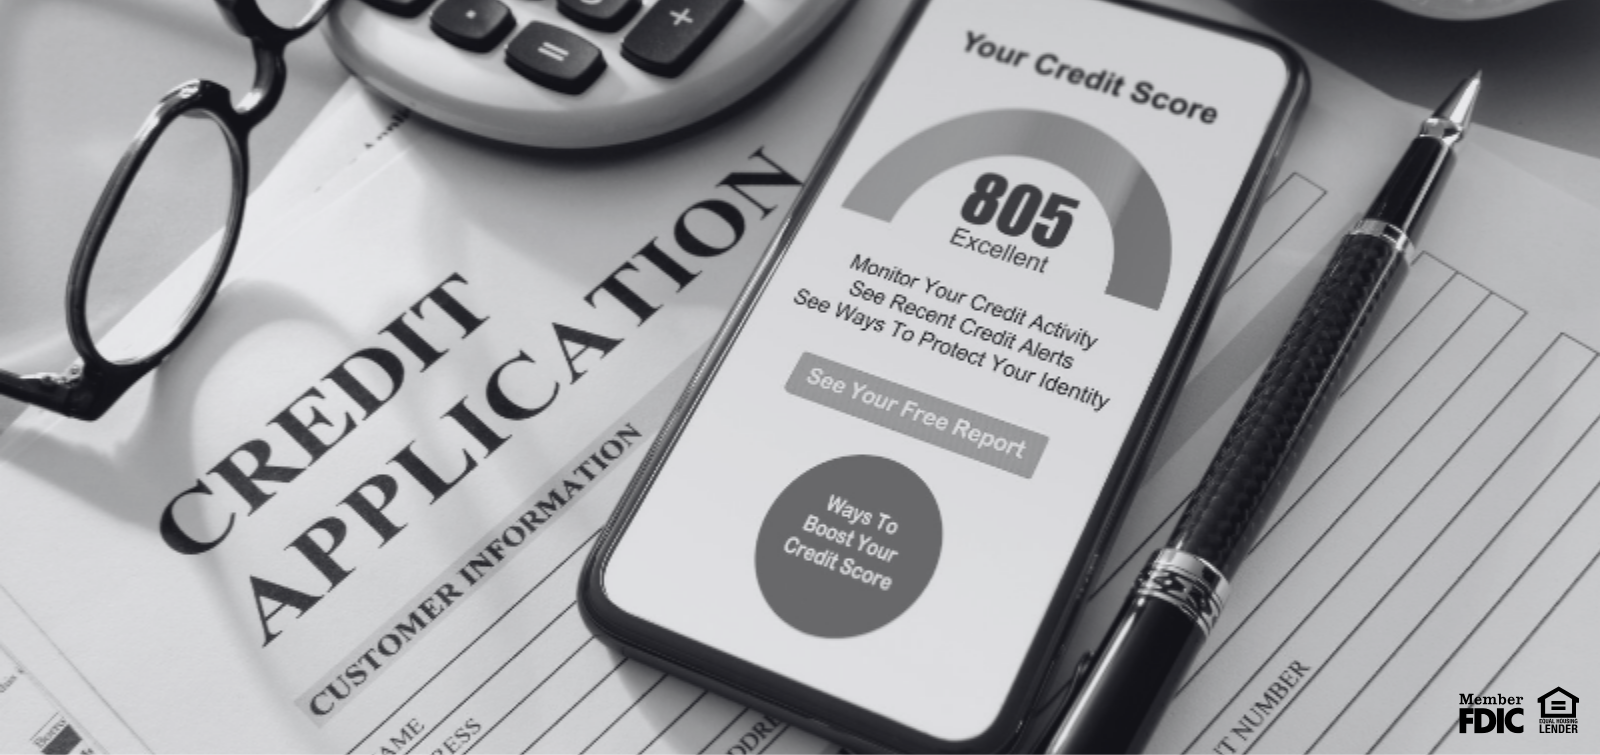 A photo showing an incredibly high credit score and credit application.